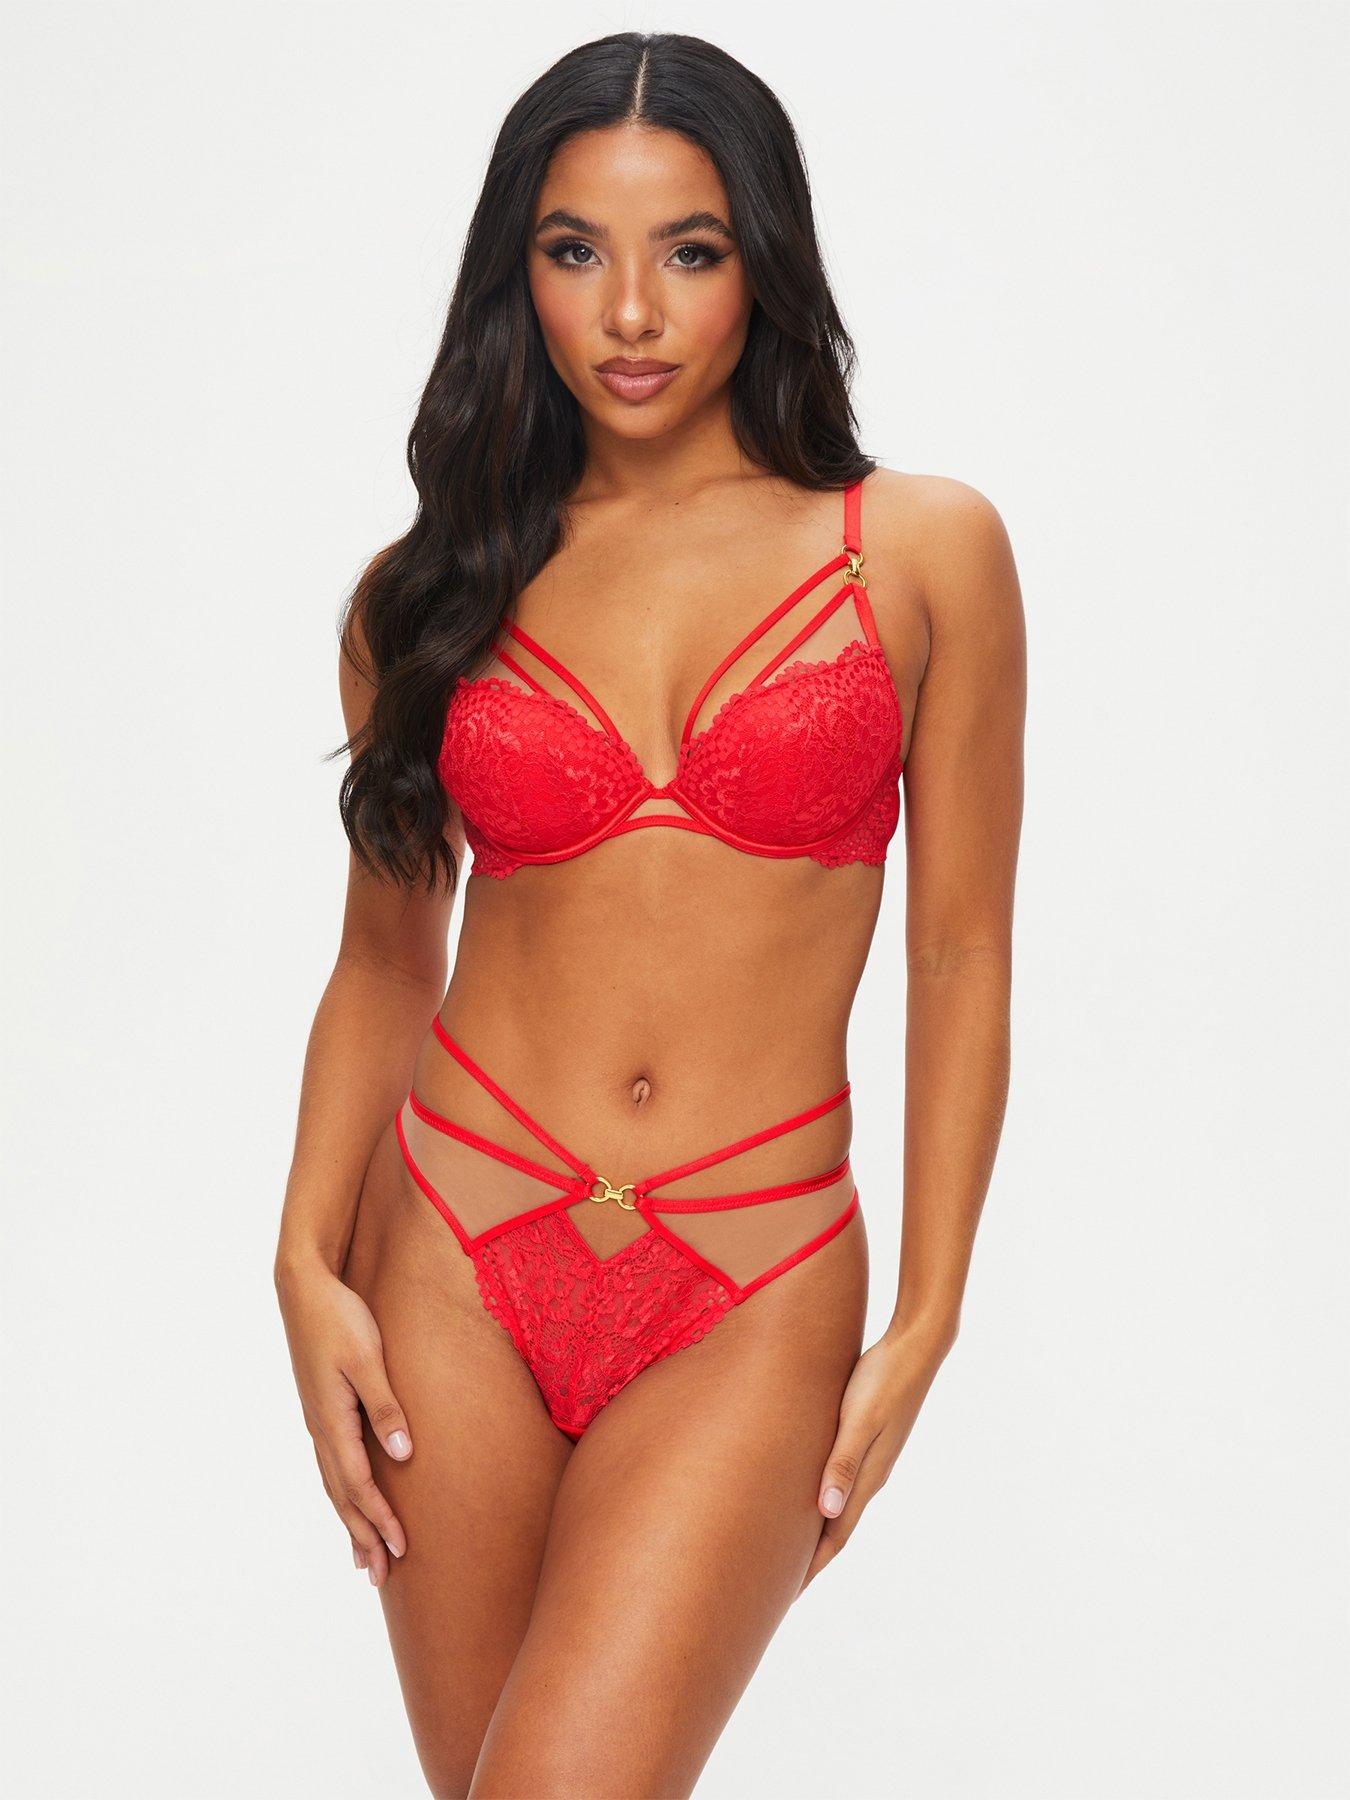 Ann Summers Strappy Mesh Bralette, Thong And Harness 3-piece Set